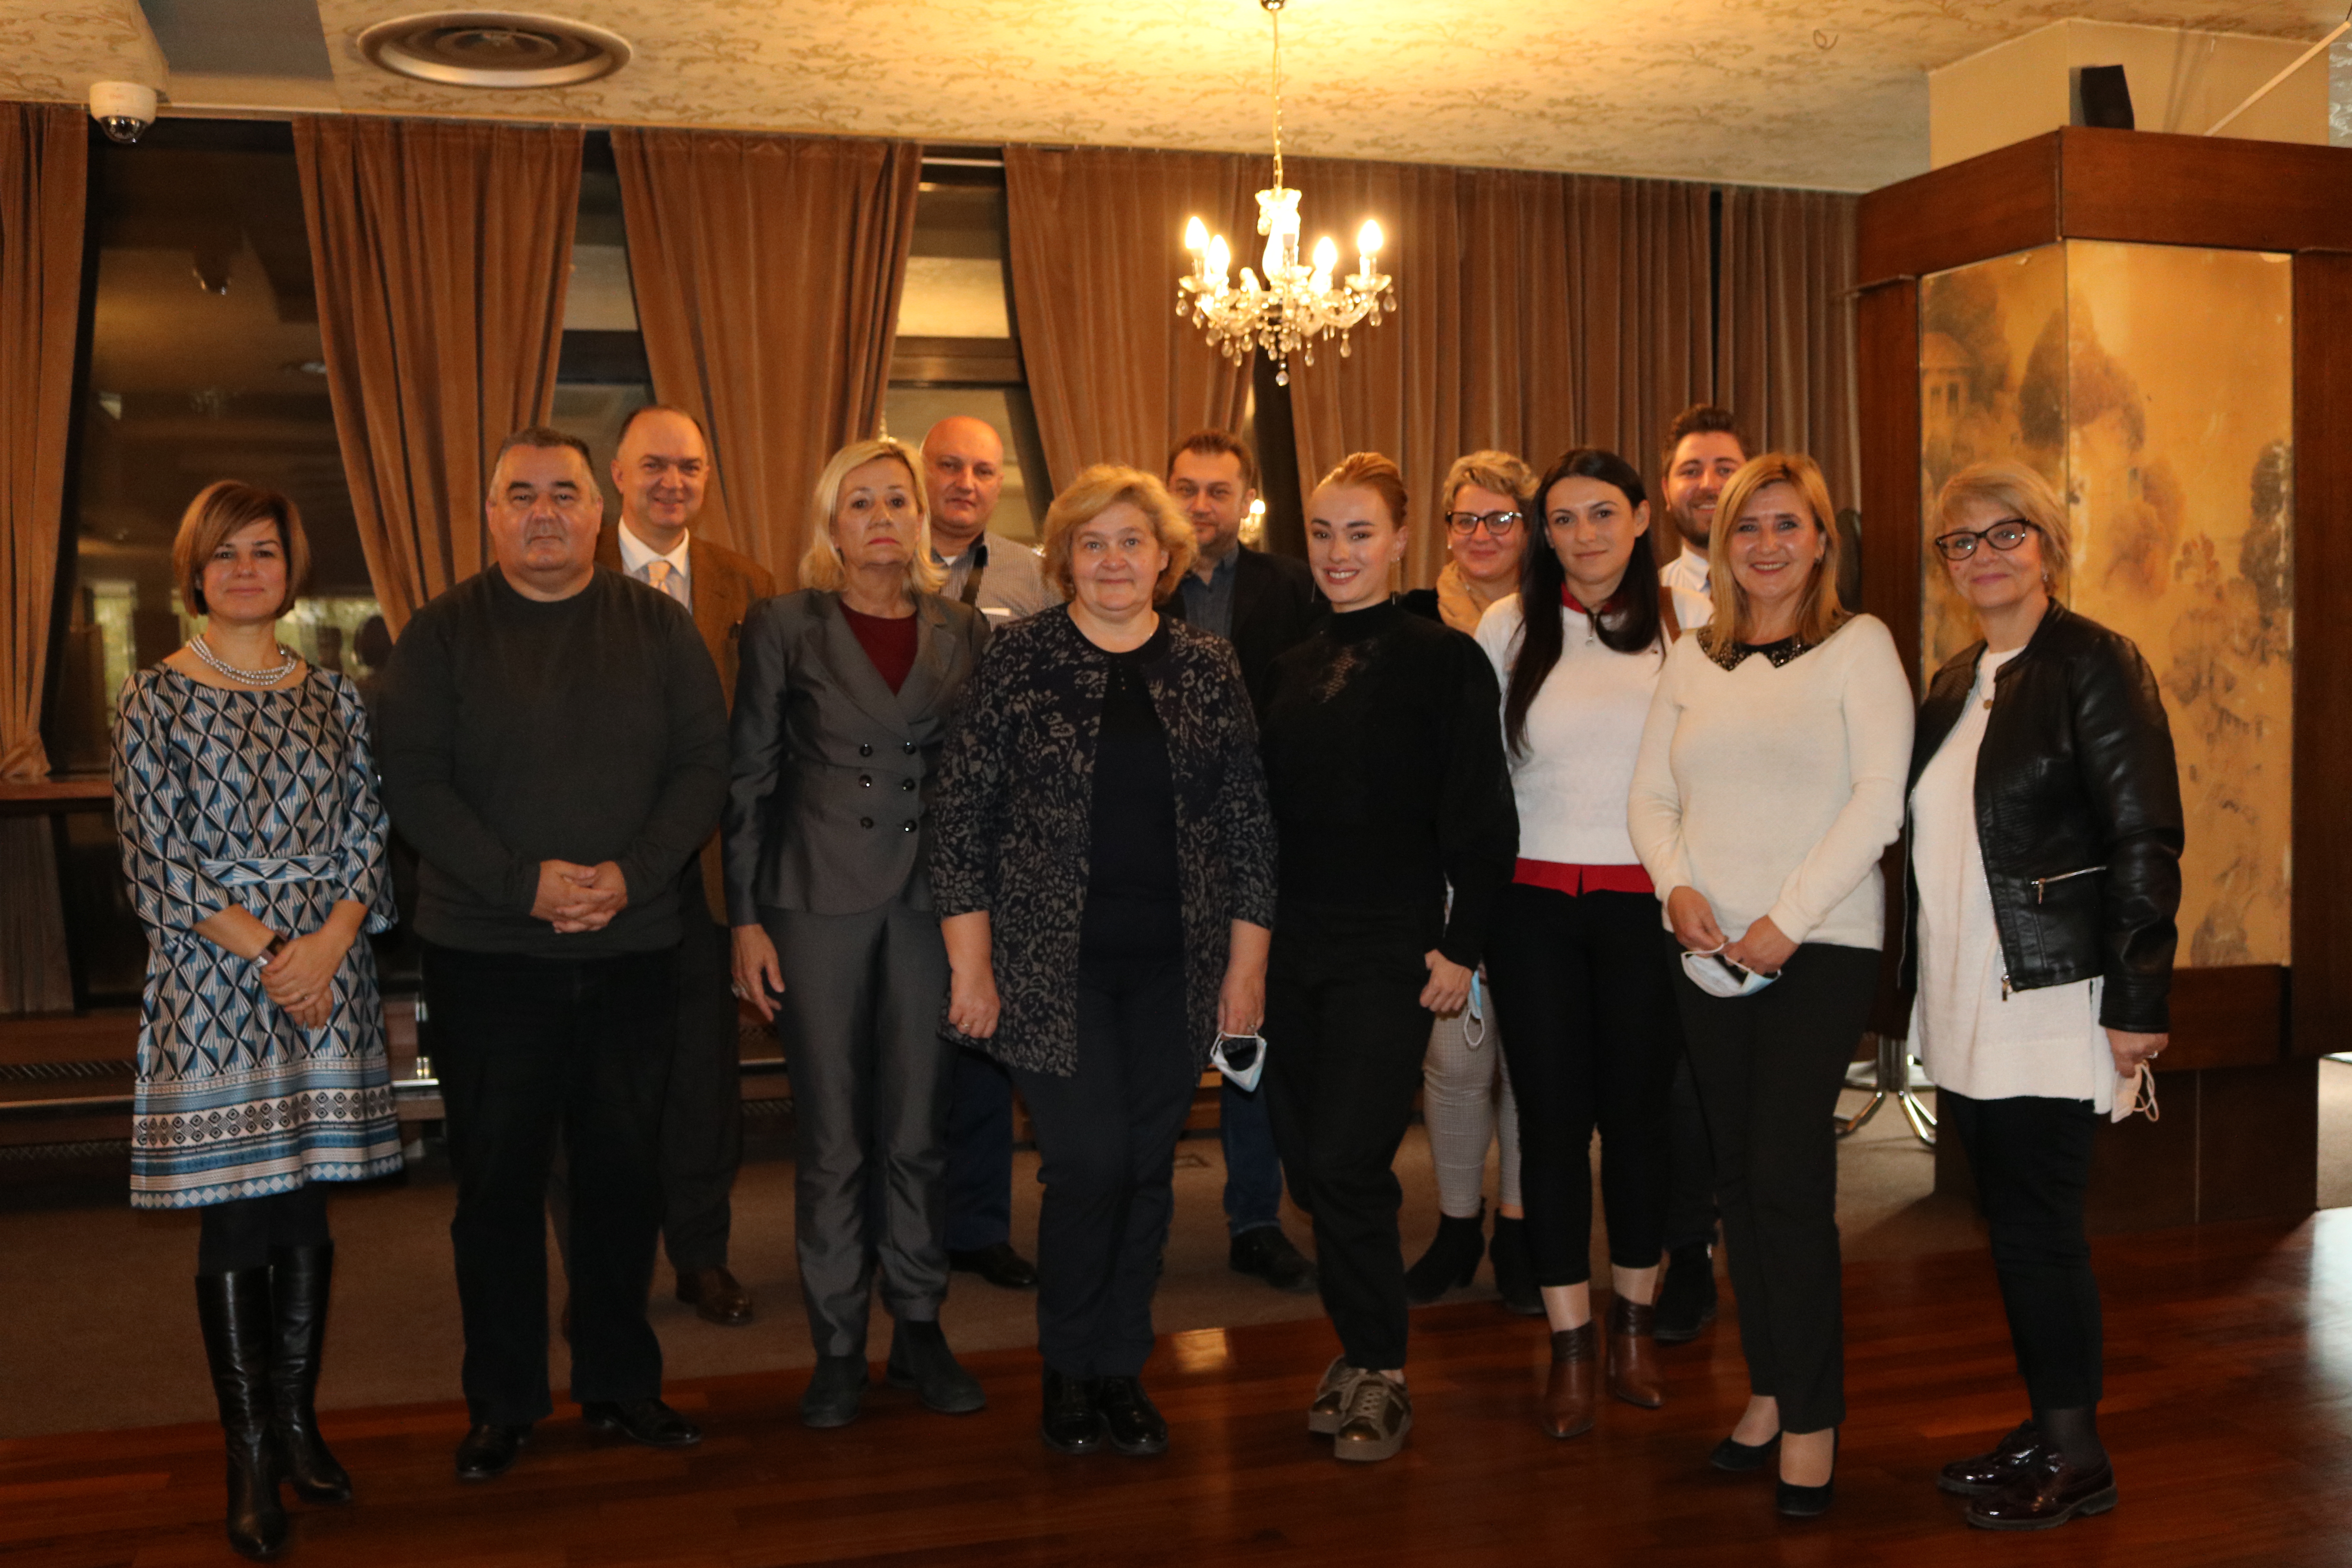 Labour inspectorate teams from Montenegro, North Macedonia with their hosts from Canton Sarajevo Inspectorate and ILO representatives in Bosnia and Herzegovina